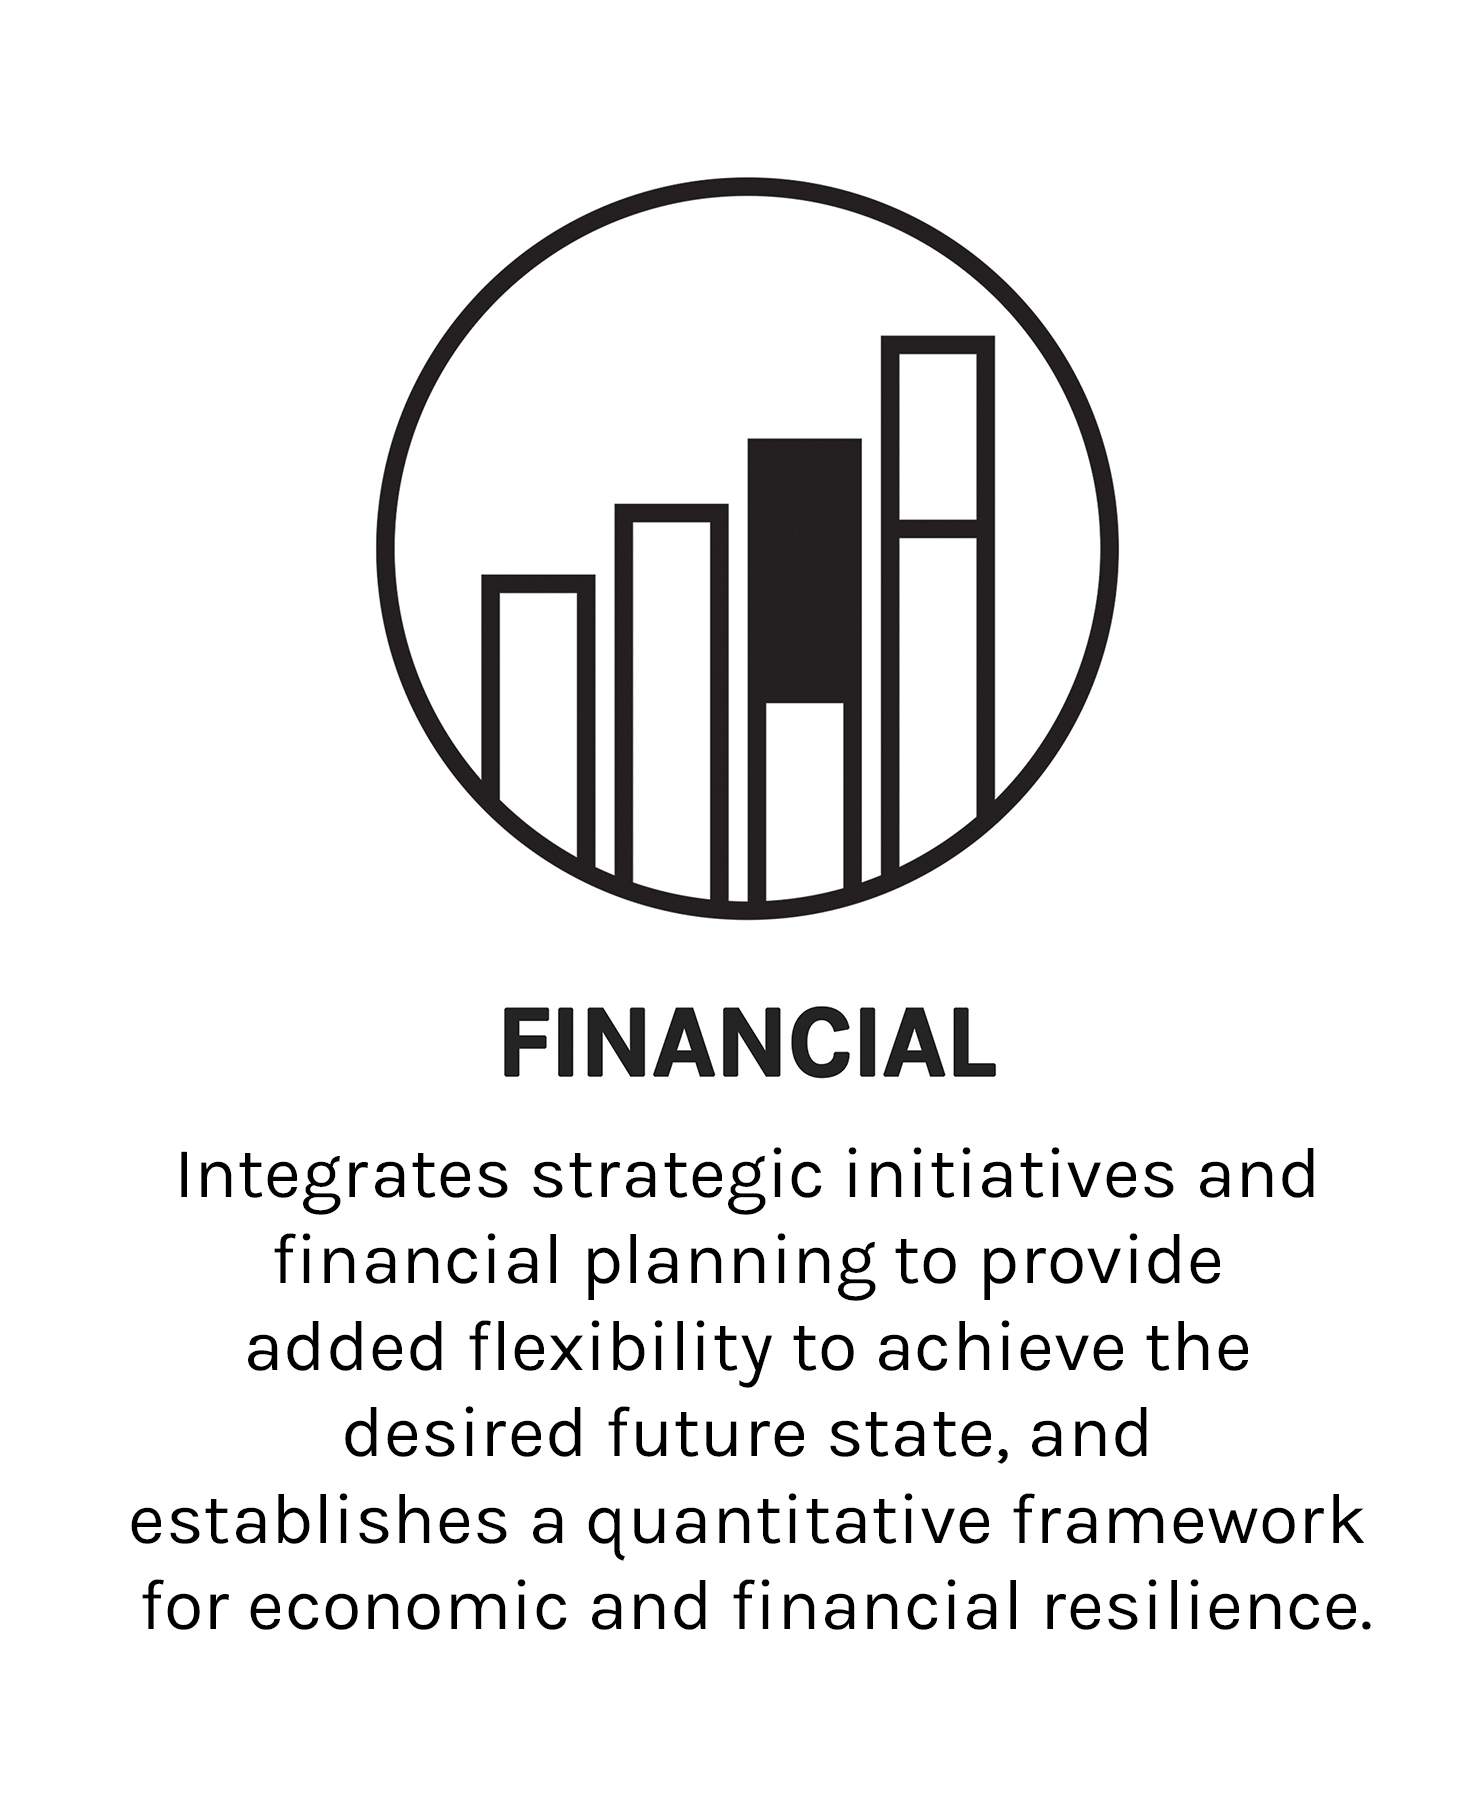 Final Financial Icon for Health Strategy SmithGroup